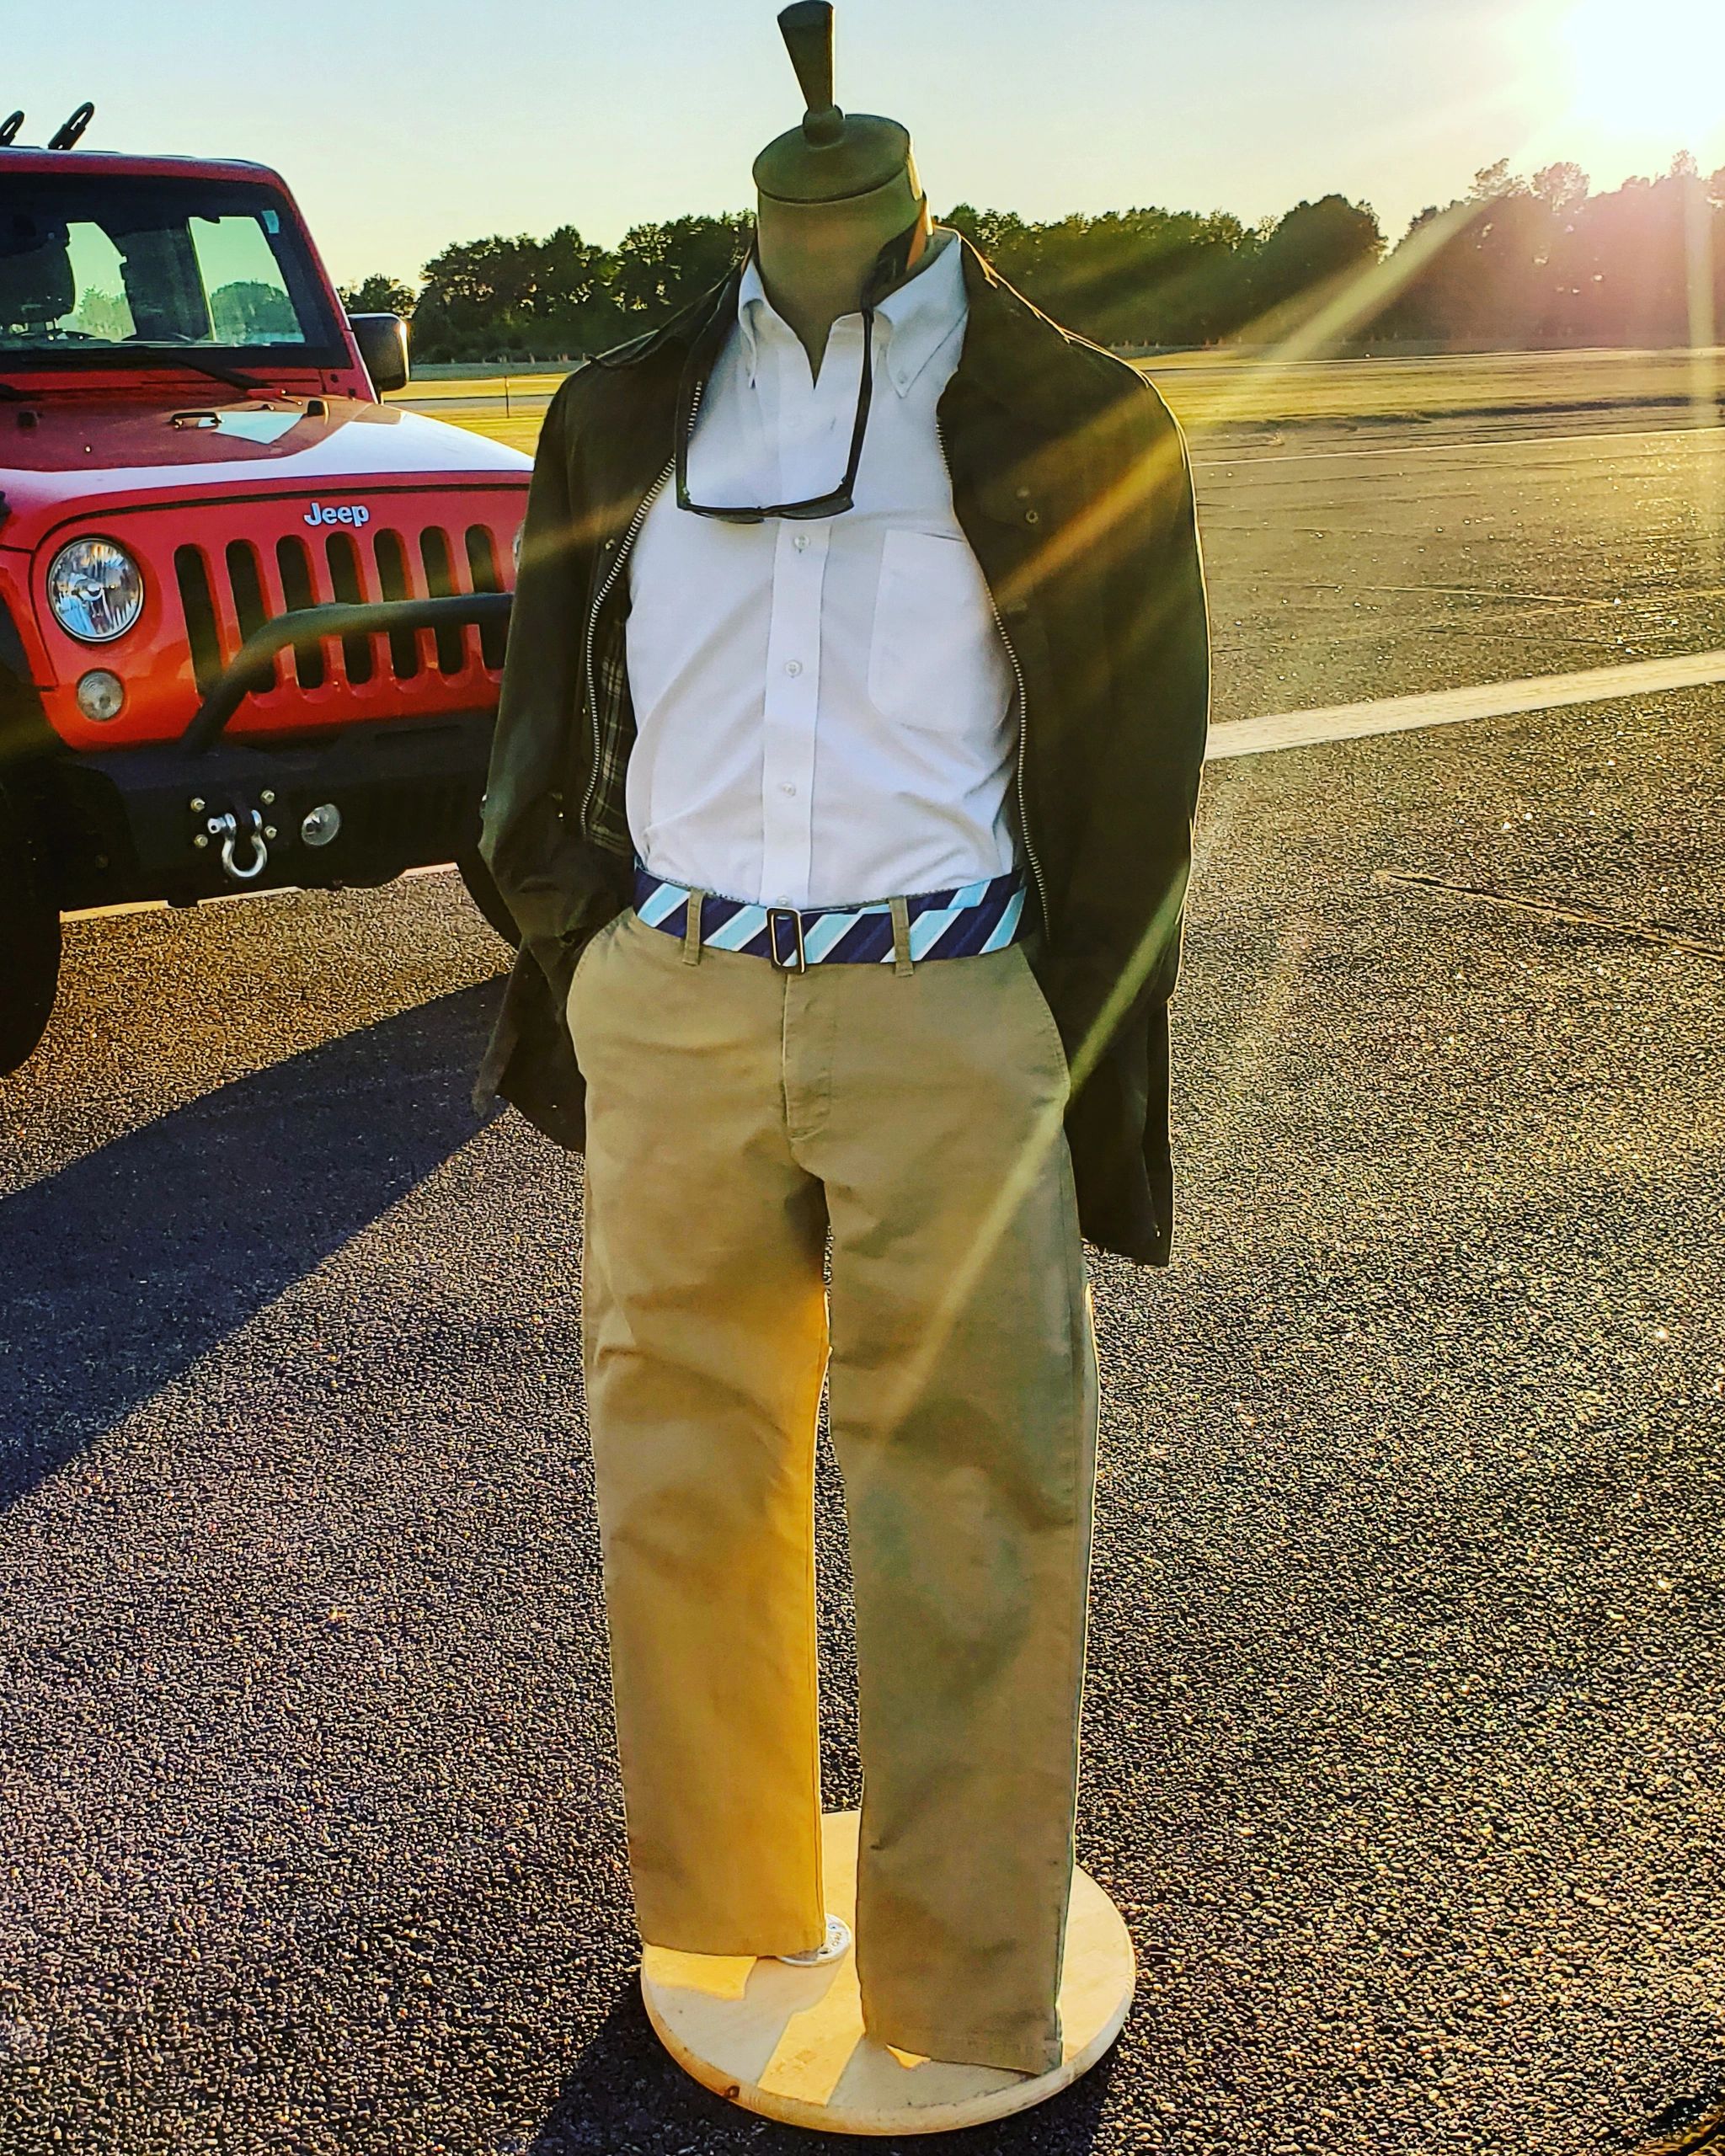 bowtie belts my boy jroy with khakis and barbour jacket polo match